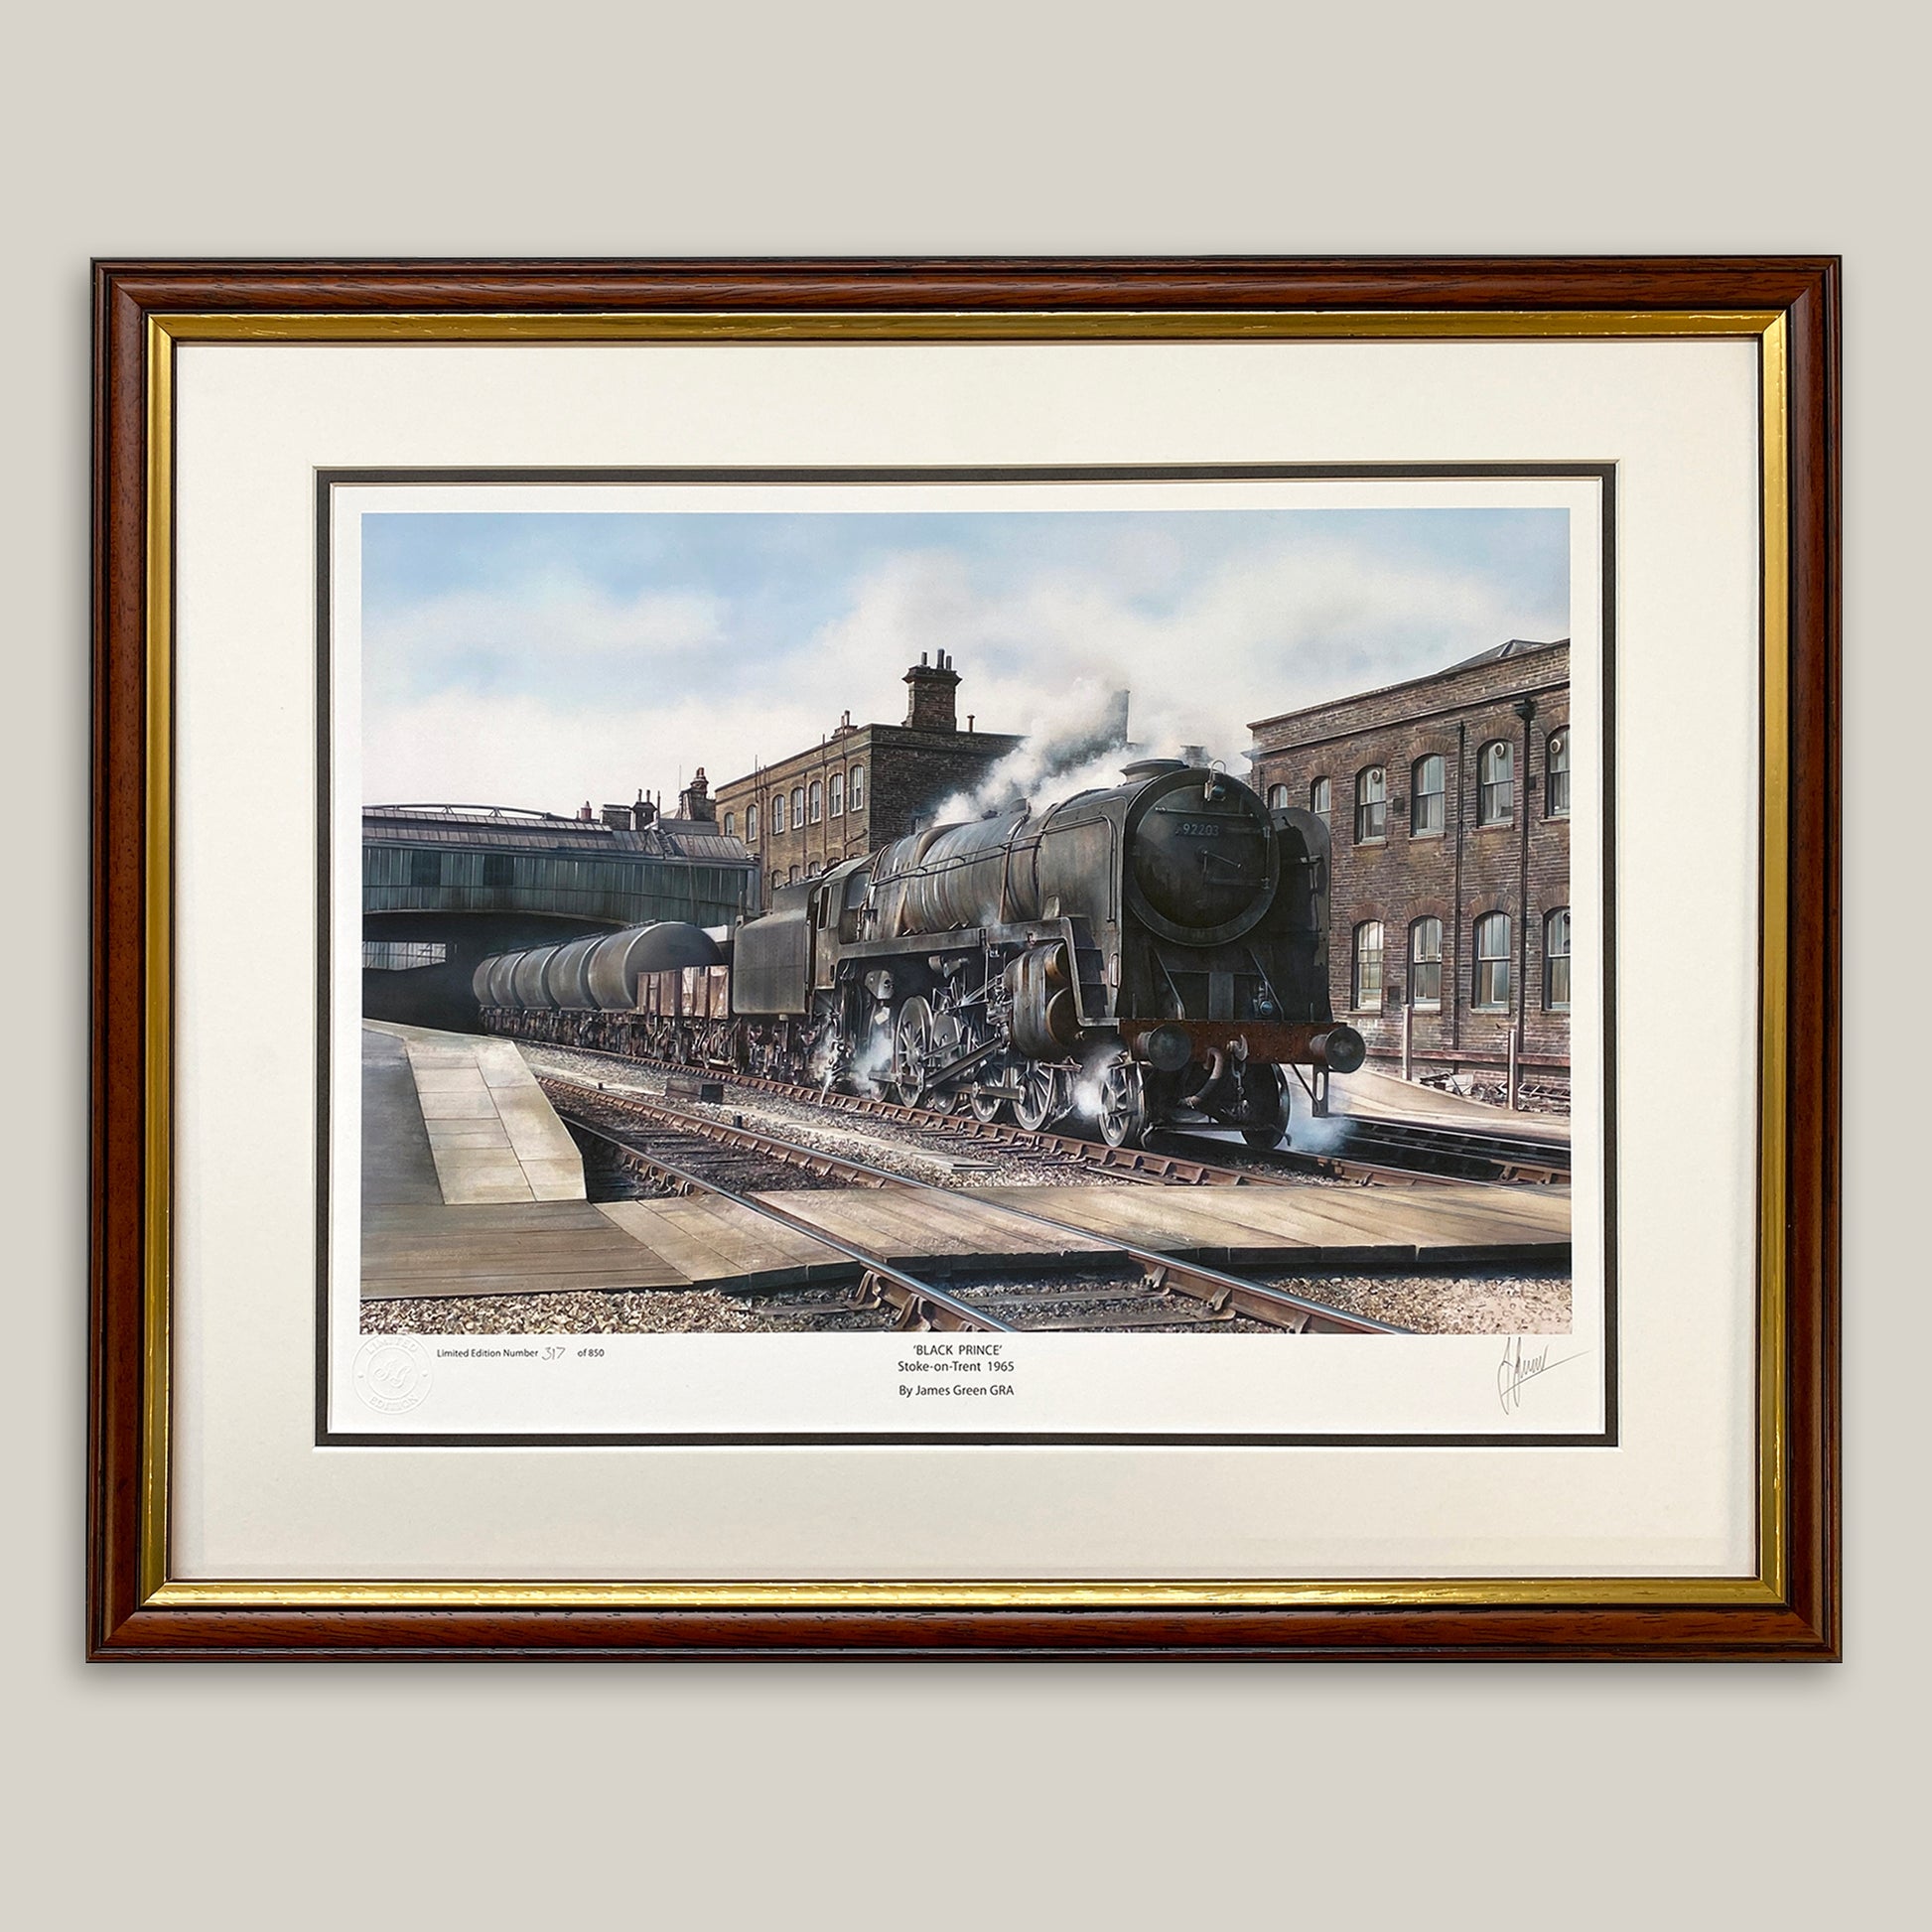 artwork of a steam train going through Stoke on Trent railway station in 1965